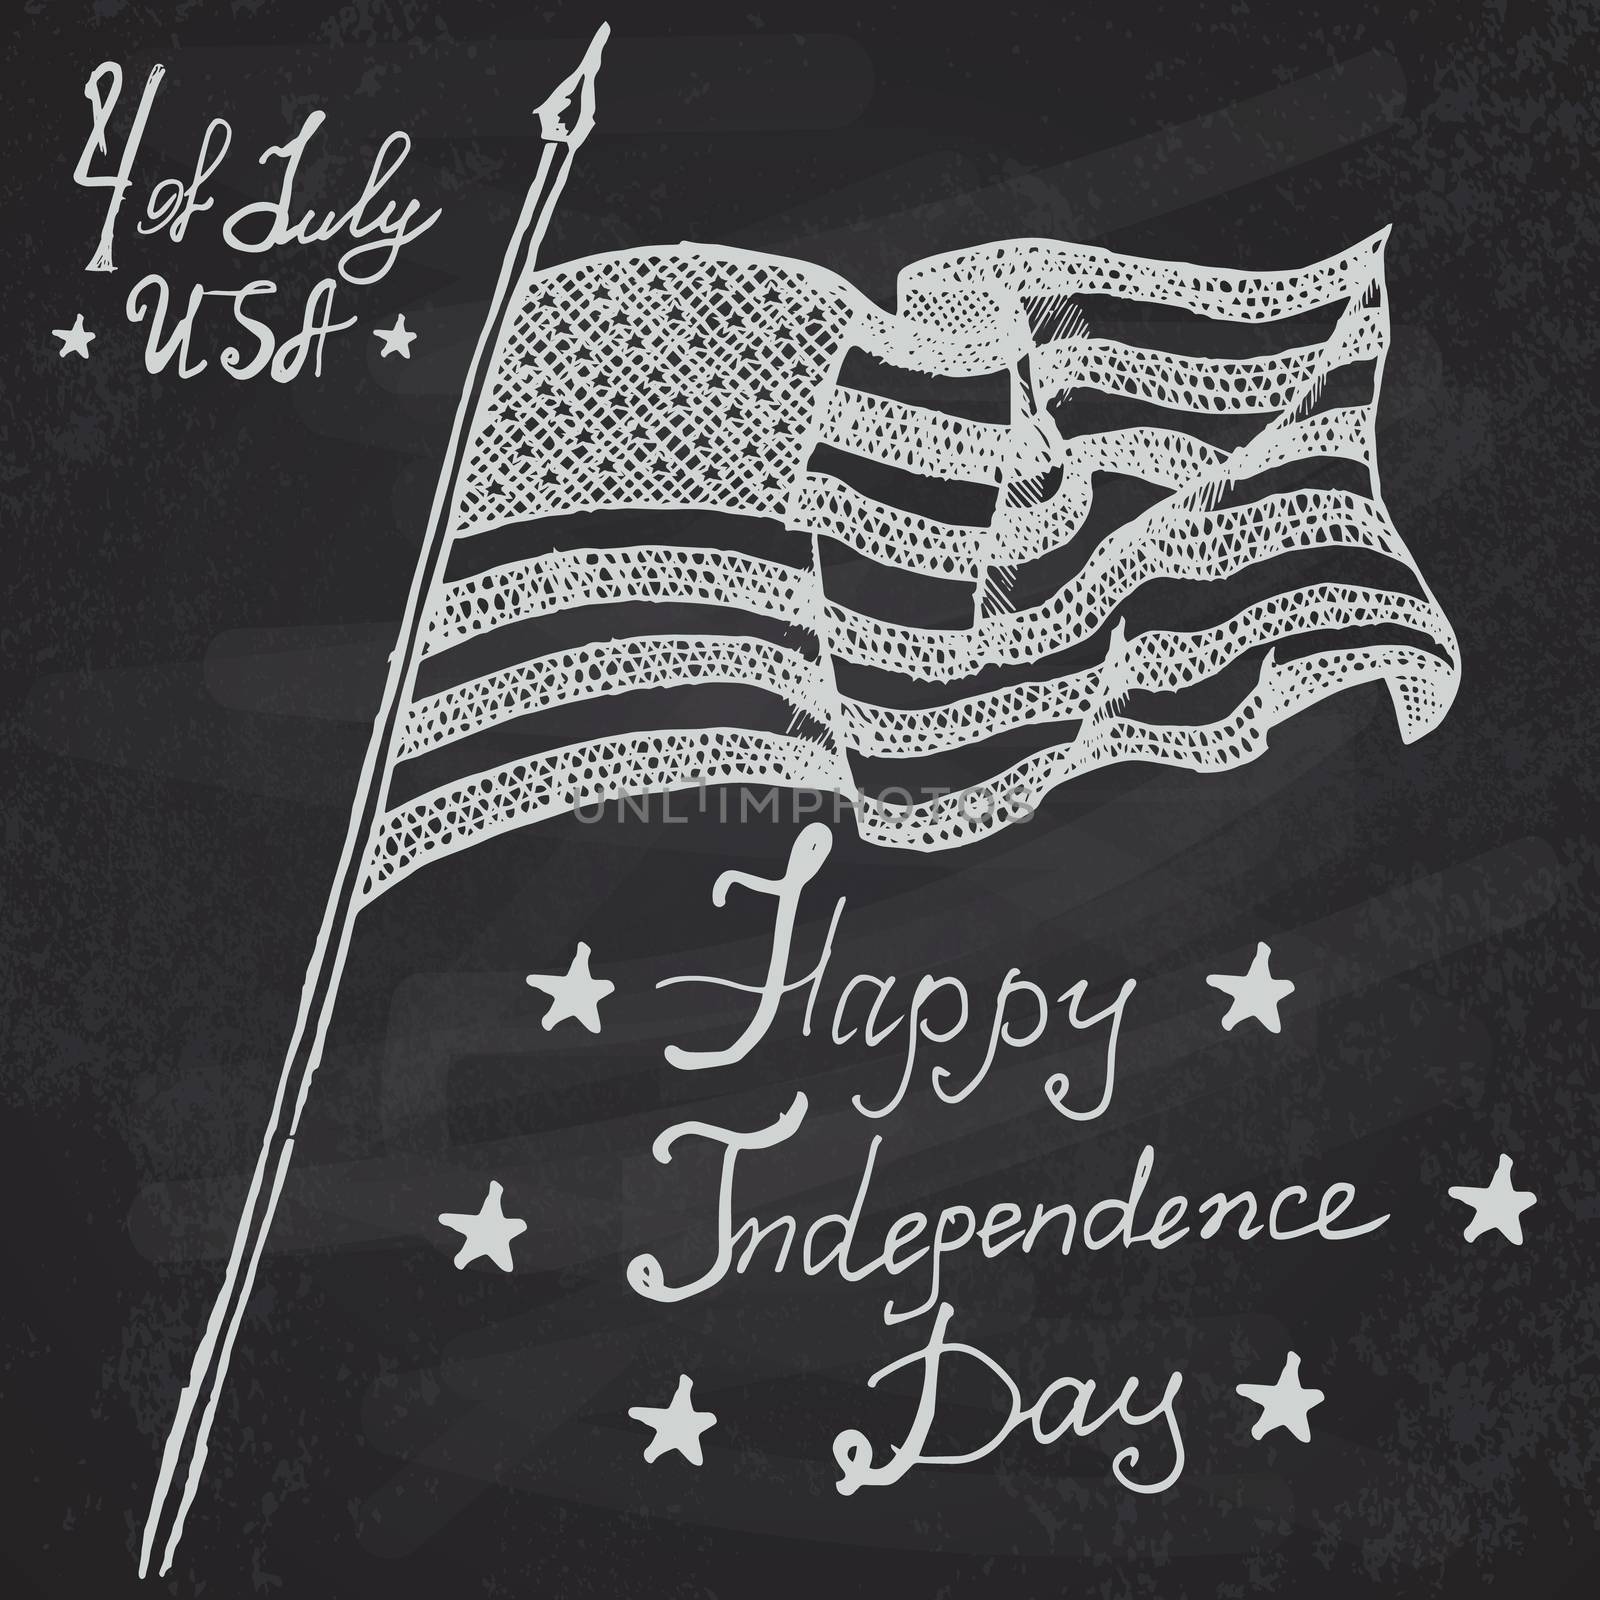 Usa waving flag, American symbol, forth of july, Hand drawn sketch, text happy independence day, vector illustration, on chalkboard background.